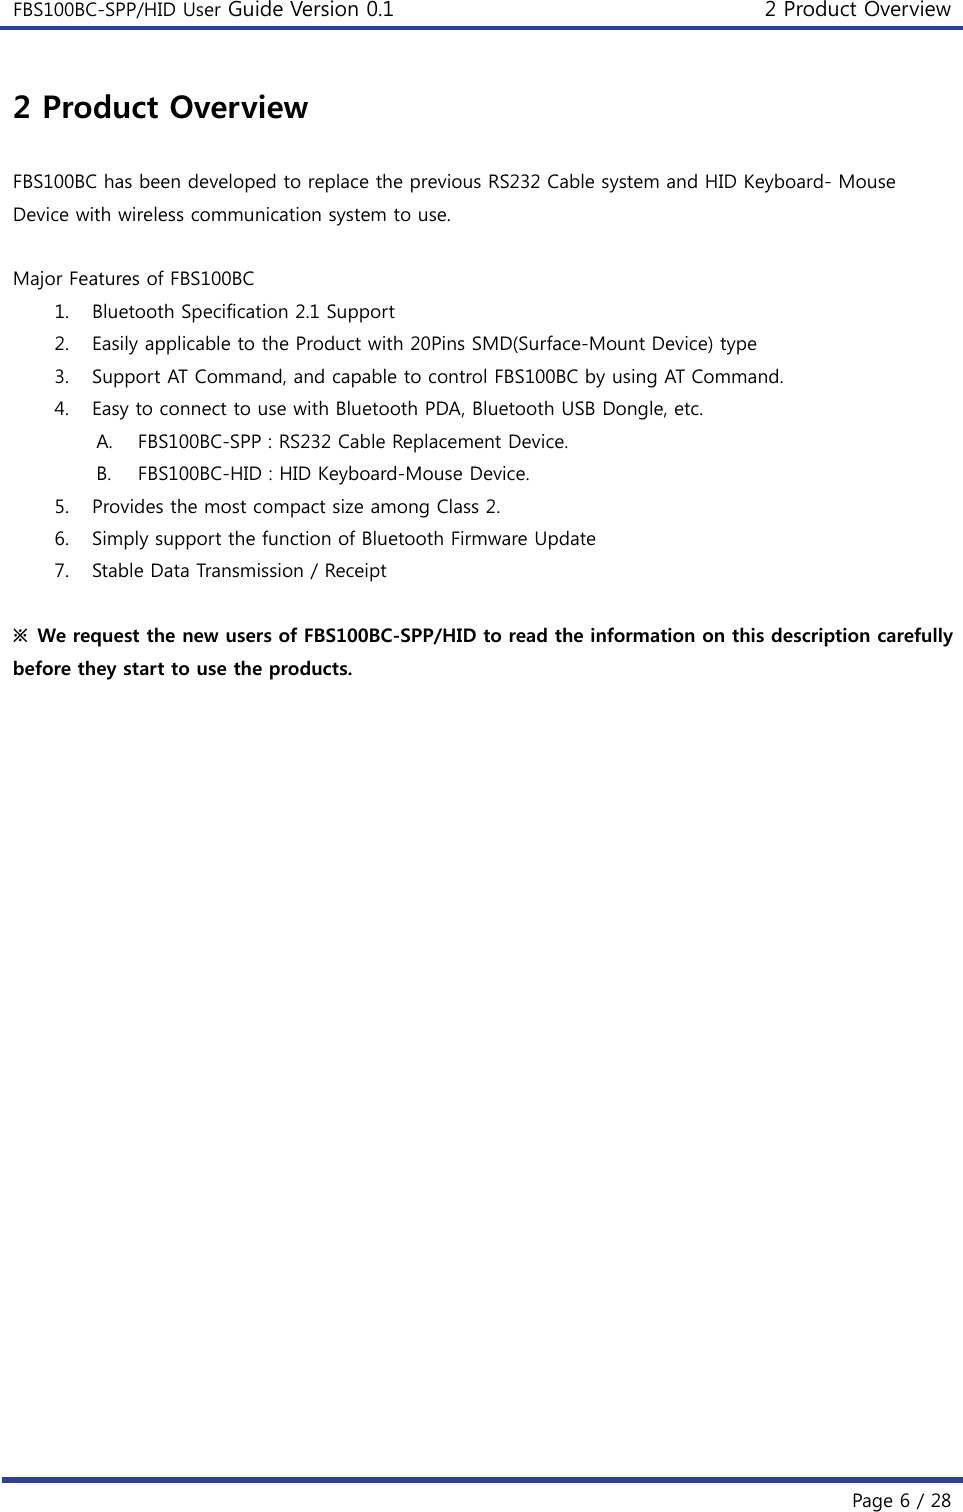 FBS100BC-SPP/HID User Guide Version 0.1 2 Product Overview  Page 6 / 28 2 Product Overview  FBS100BC has been developed to replace the previous RS232 Cable system and HID Keyboard- Mouse Device with wireless communication system to use.  Major Features of FBS100BC 1. Bluetooth Specification 2.1 Support 2. Easily applicable to the Product with 20Pins SMD(Surface-Mount Device) type 3. Support AT Command, and capable to control FBS100BC by using AT Command. 4. Easy to connect to use with Bluetooth PDA, Bluetooth USB Dongle, etc. A. FBS100BC-SPP : RS232 Cable Replacement Device. B. FBS100BC-HID : HID Keyboard-Mouse Device.   5. Provides the most compact size among Class 2. 6. Simply support the function of Bluetooth Firmware Update 7. Stable Data Transmission / Receipt  ※ We request the new users of FBS100BC-SPP/HID to read the information on this description carefully before they start to use the products.    